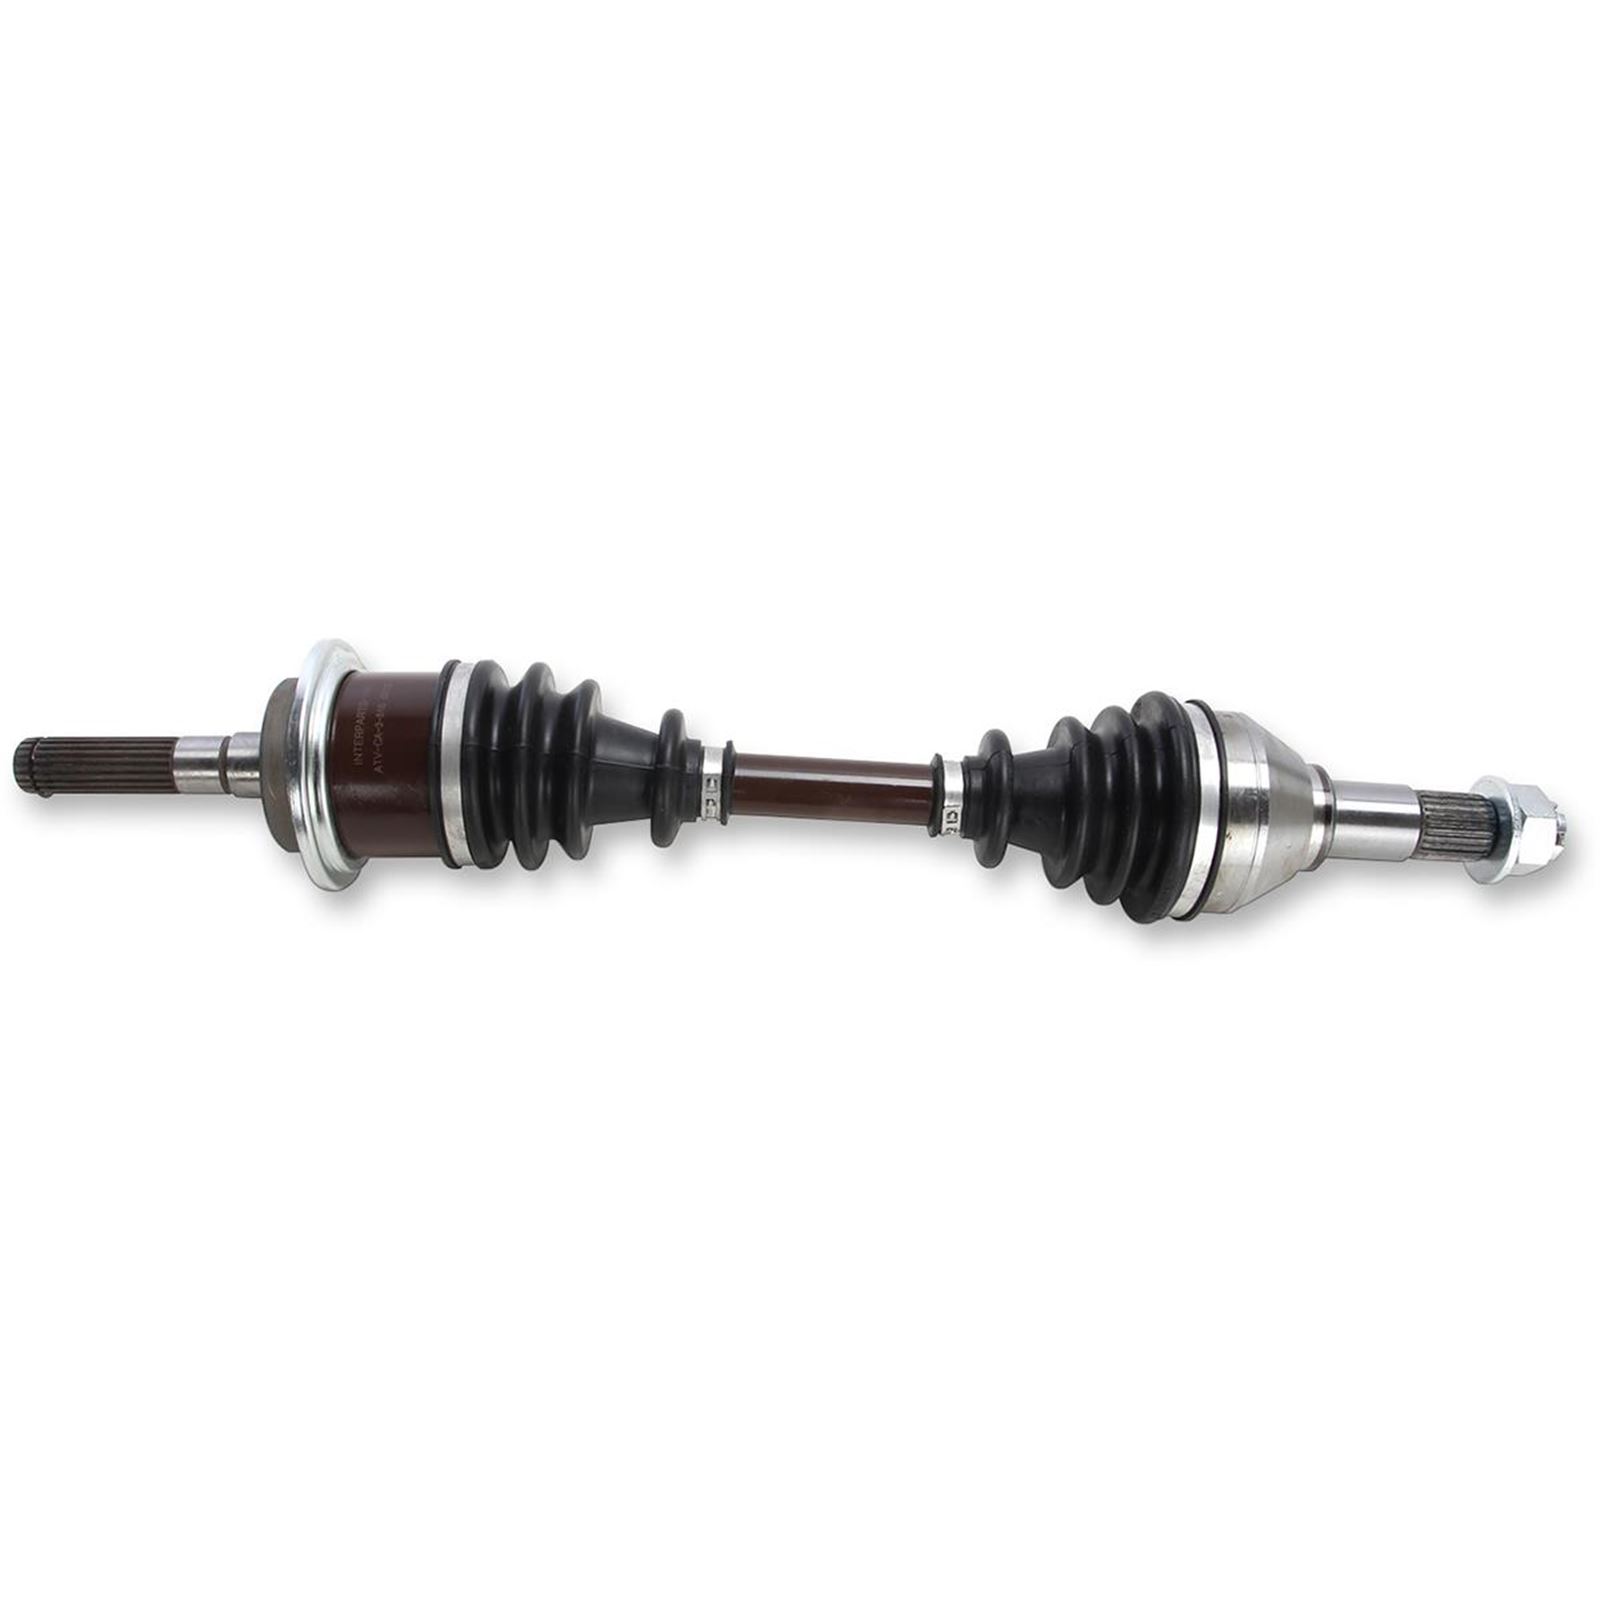 Moose Racing Complete Axle - Kit - Can-Am